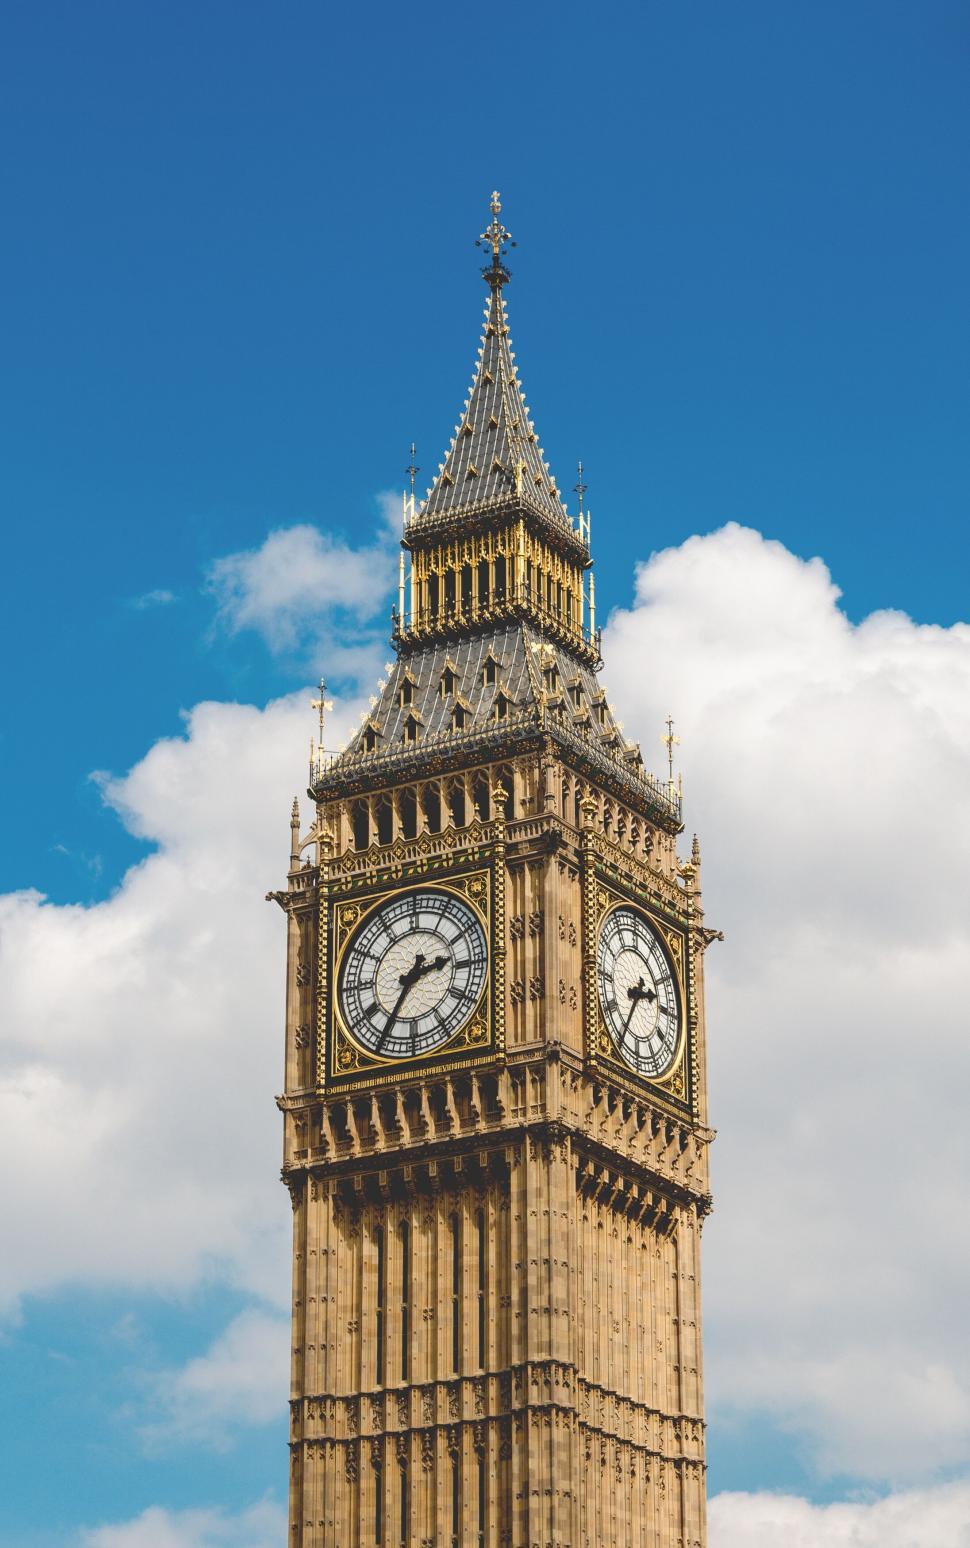 Free Image of Iconic Big Ben clock tower under blue sky 